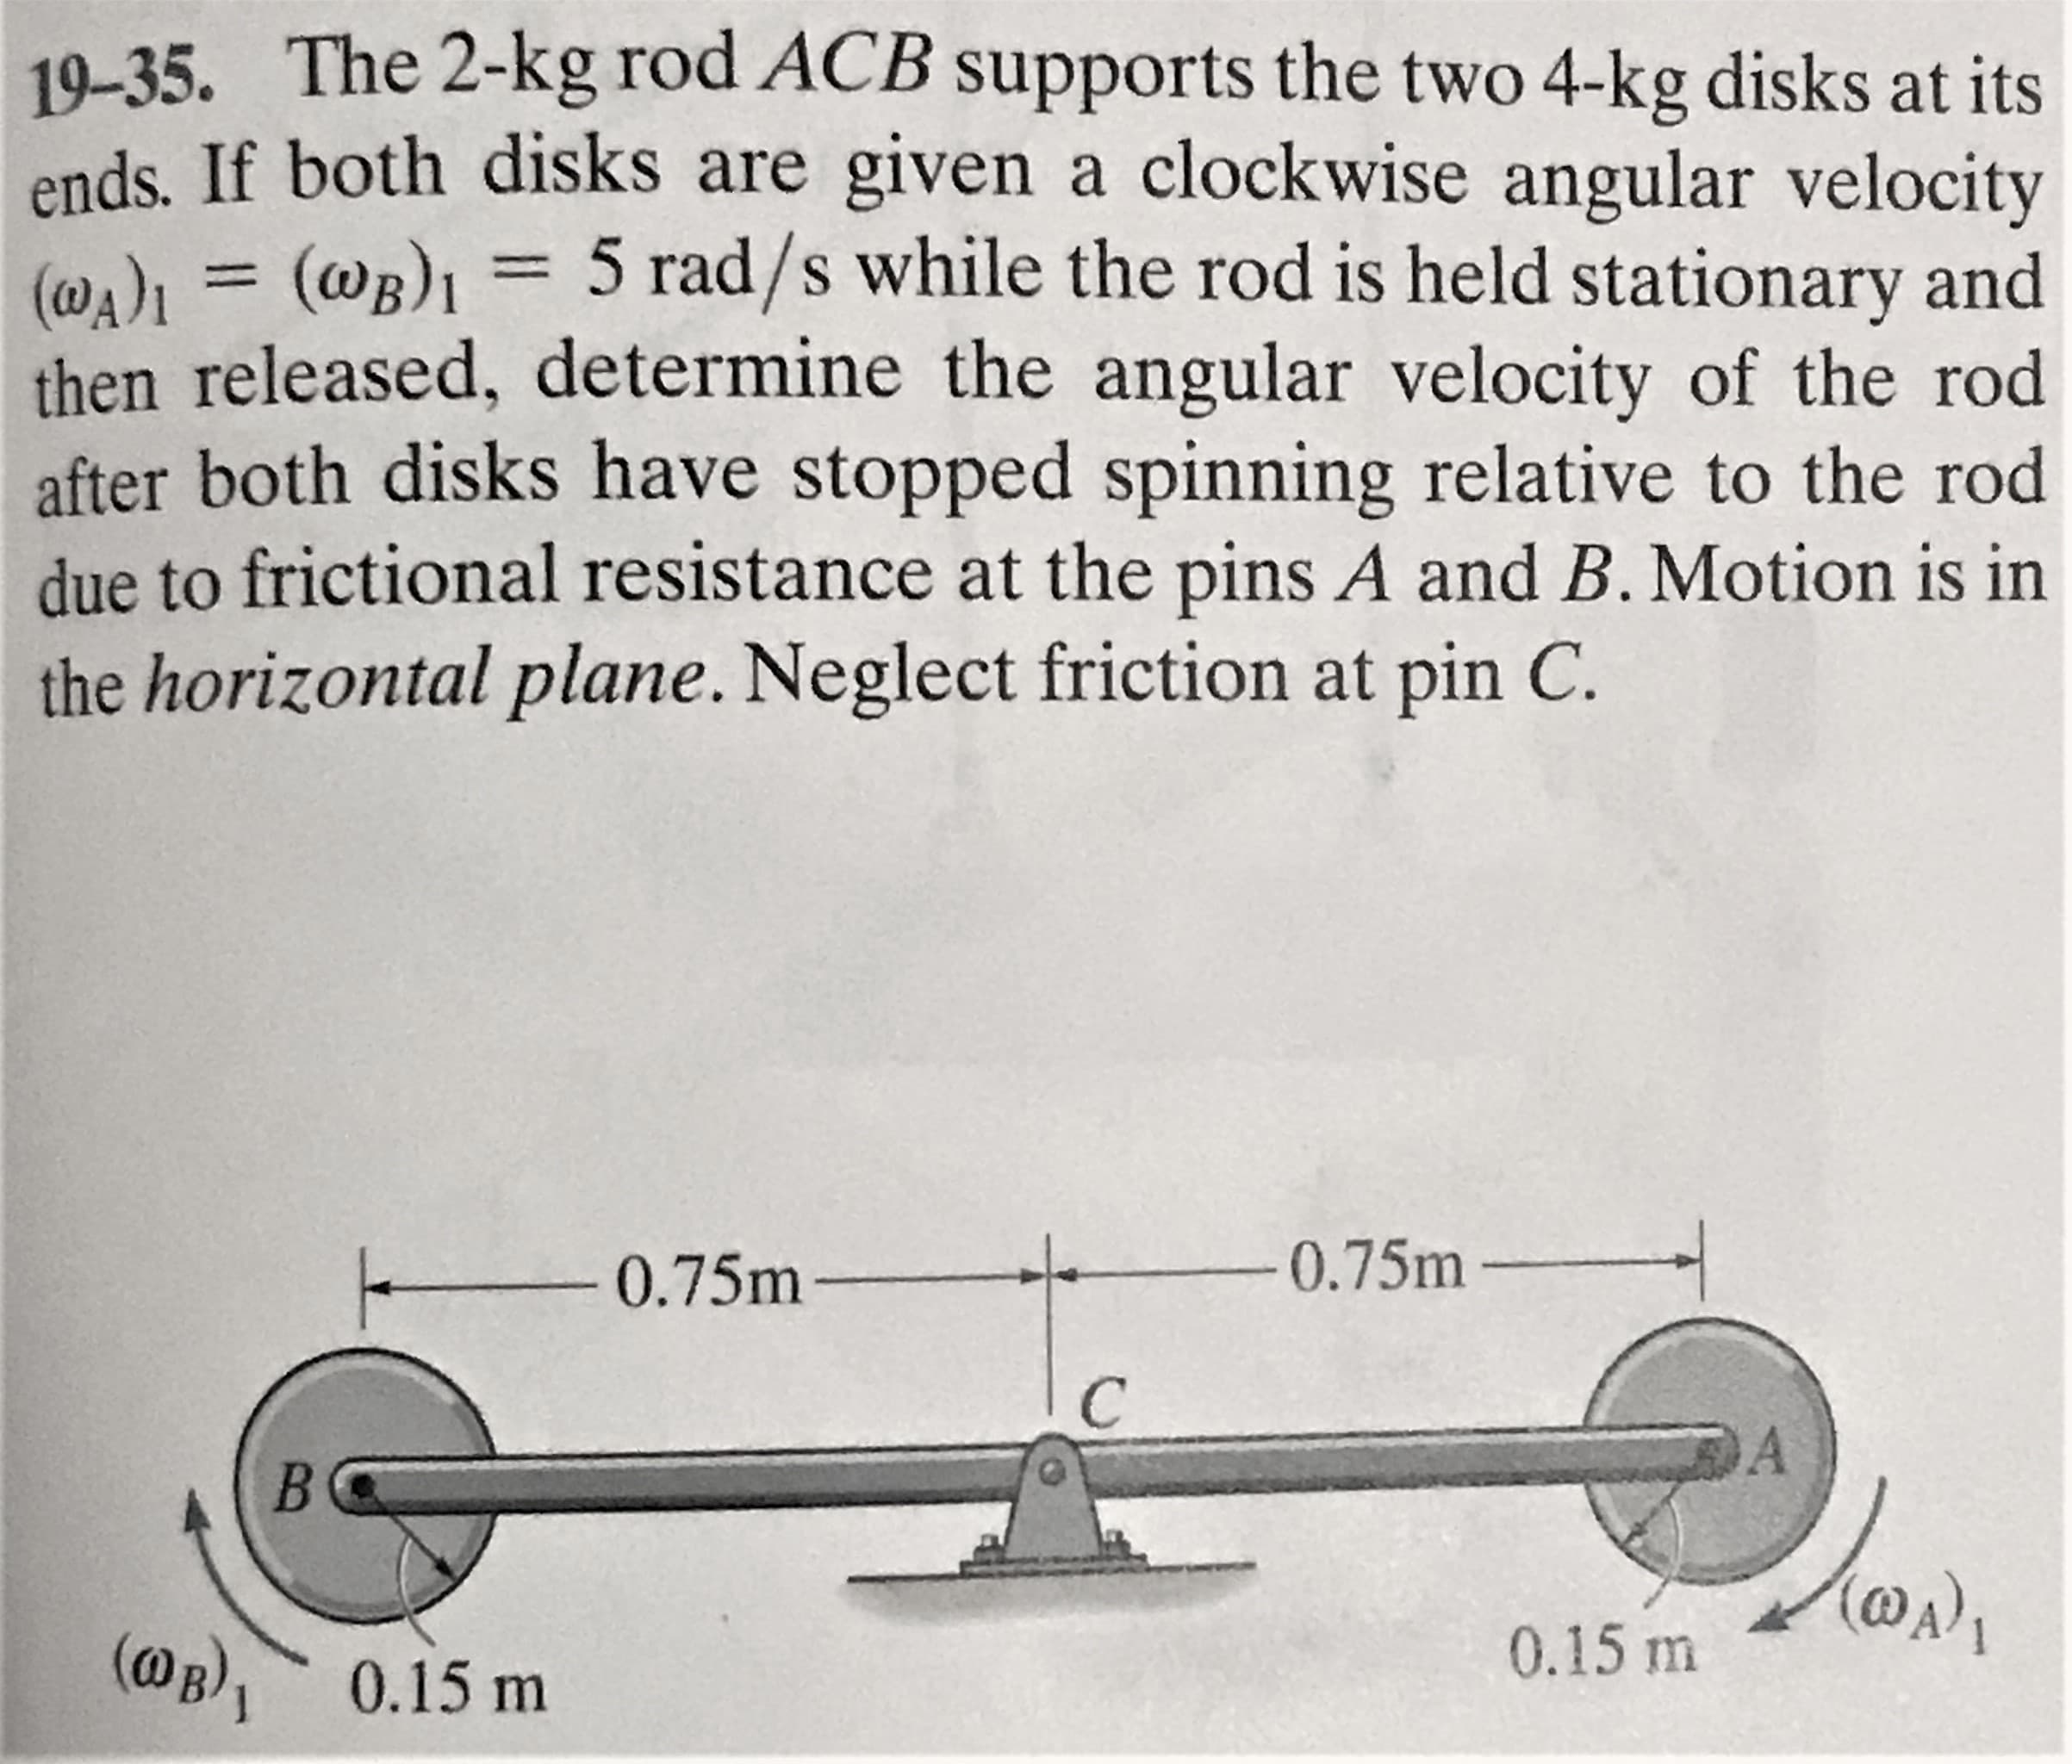 19-35. The 2-kg rod ACB supports the two 4-kg disks at its
ends. If both disks are given a clockwise angular velocity
(@,), = (@B)1 = 5 rad/s while the rod is held stationary and
then released, determine the angular velocity of the rod
after both disks have stopped spinning relative to the rod
due to frictional resistance at the pins A and B. Motion is in
the horizontal plane. Neglect friction at pin C.
%3D
0.75m-
0.75m
(@B), 0.15 m
0.15 m
